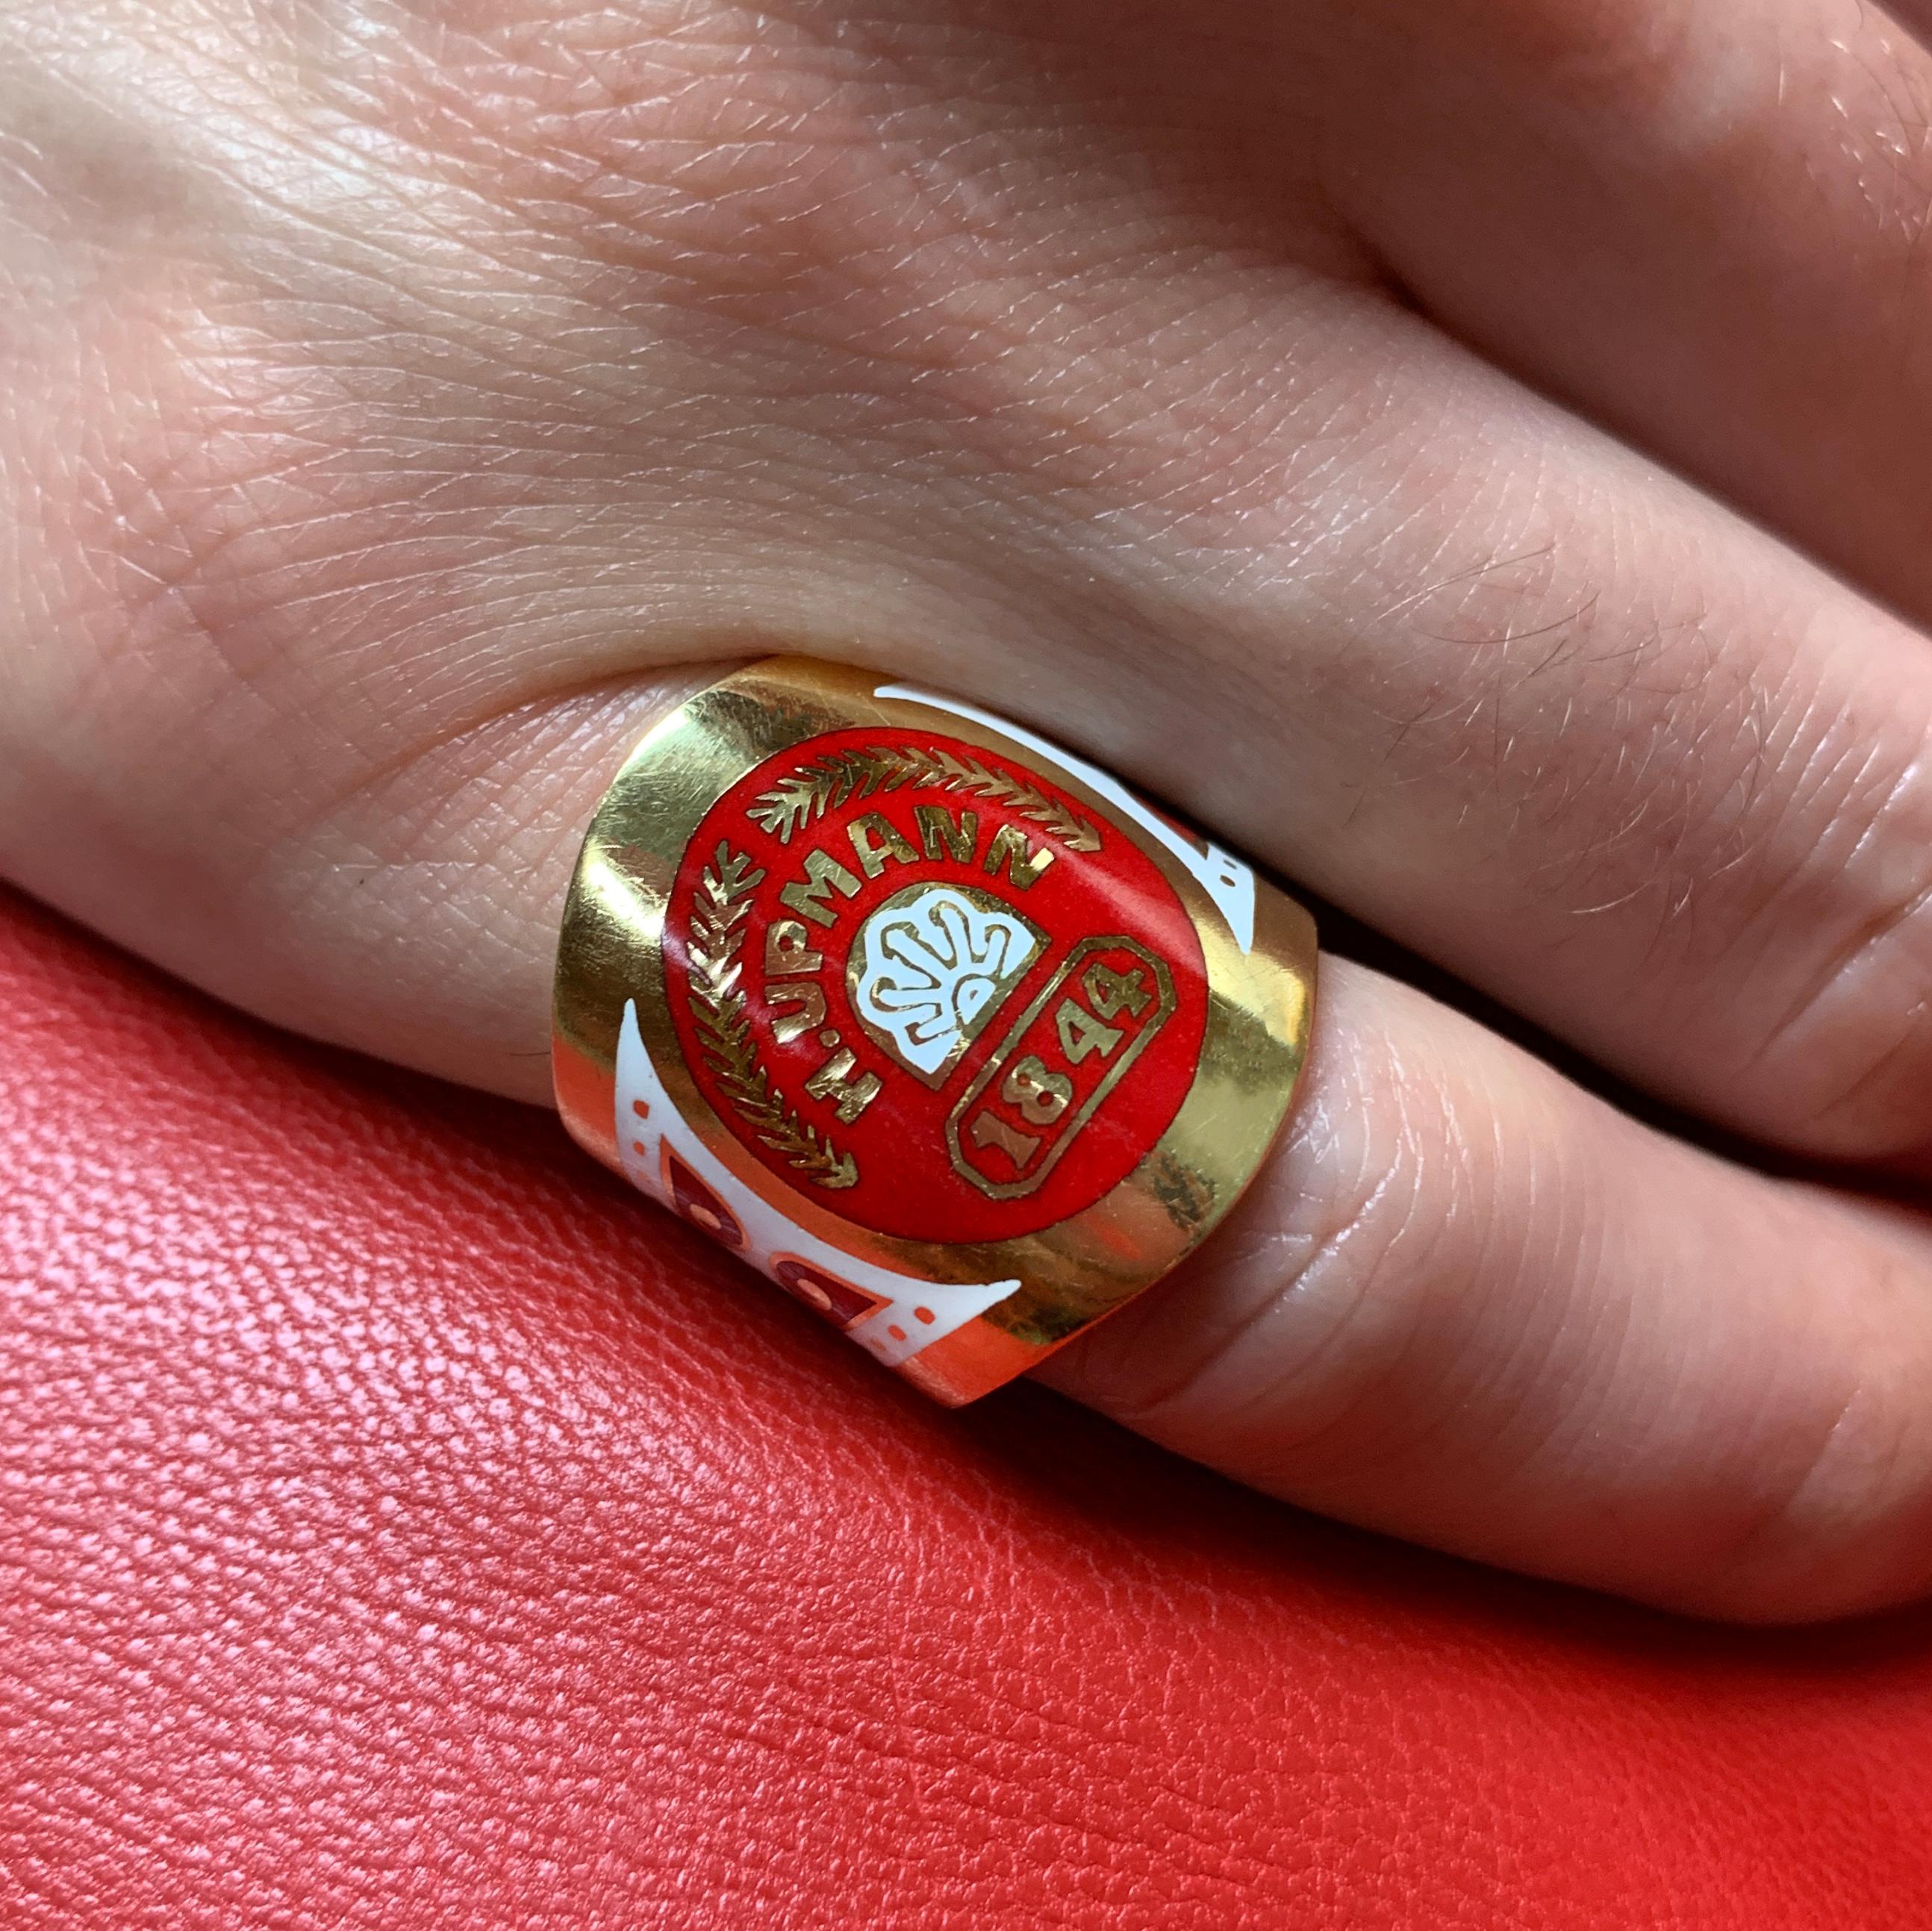 An enamel and 18 karat gold cigar band ring, by Verdura, 2001. 

The ring is a size 5 and is signed Verdura, maker's mark and French import mark.